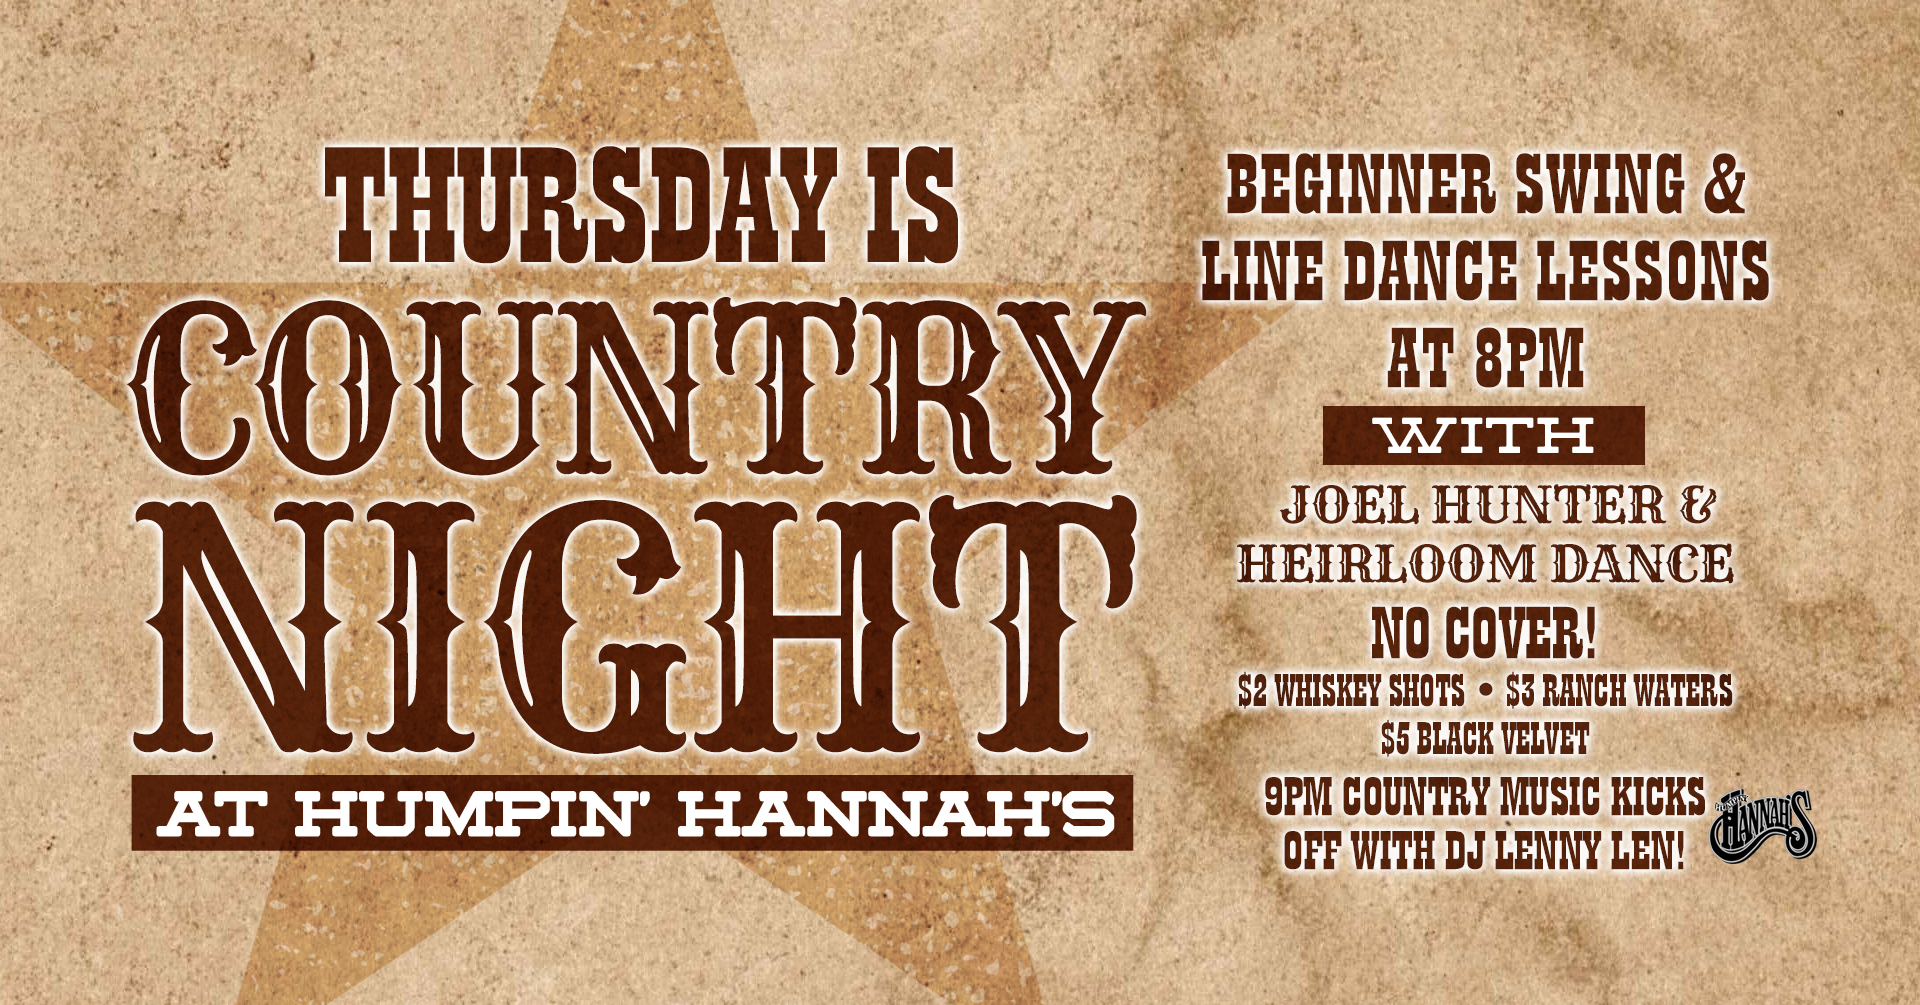 Thursday night is country night